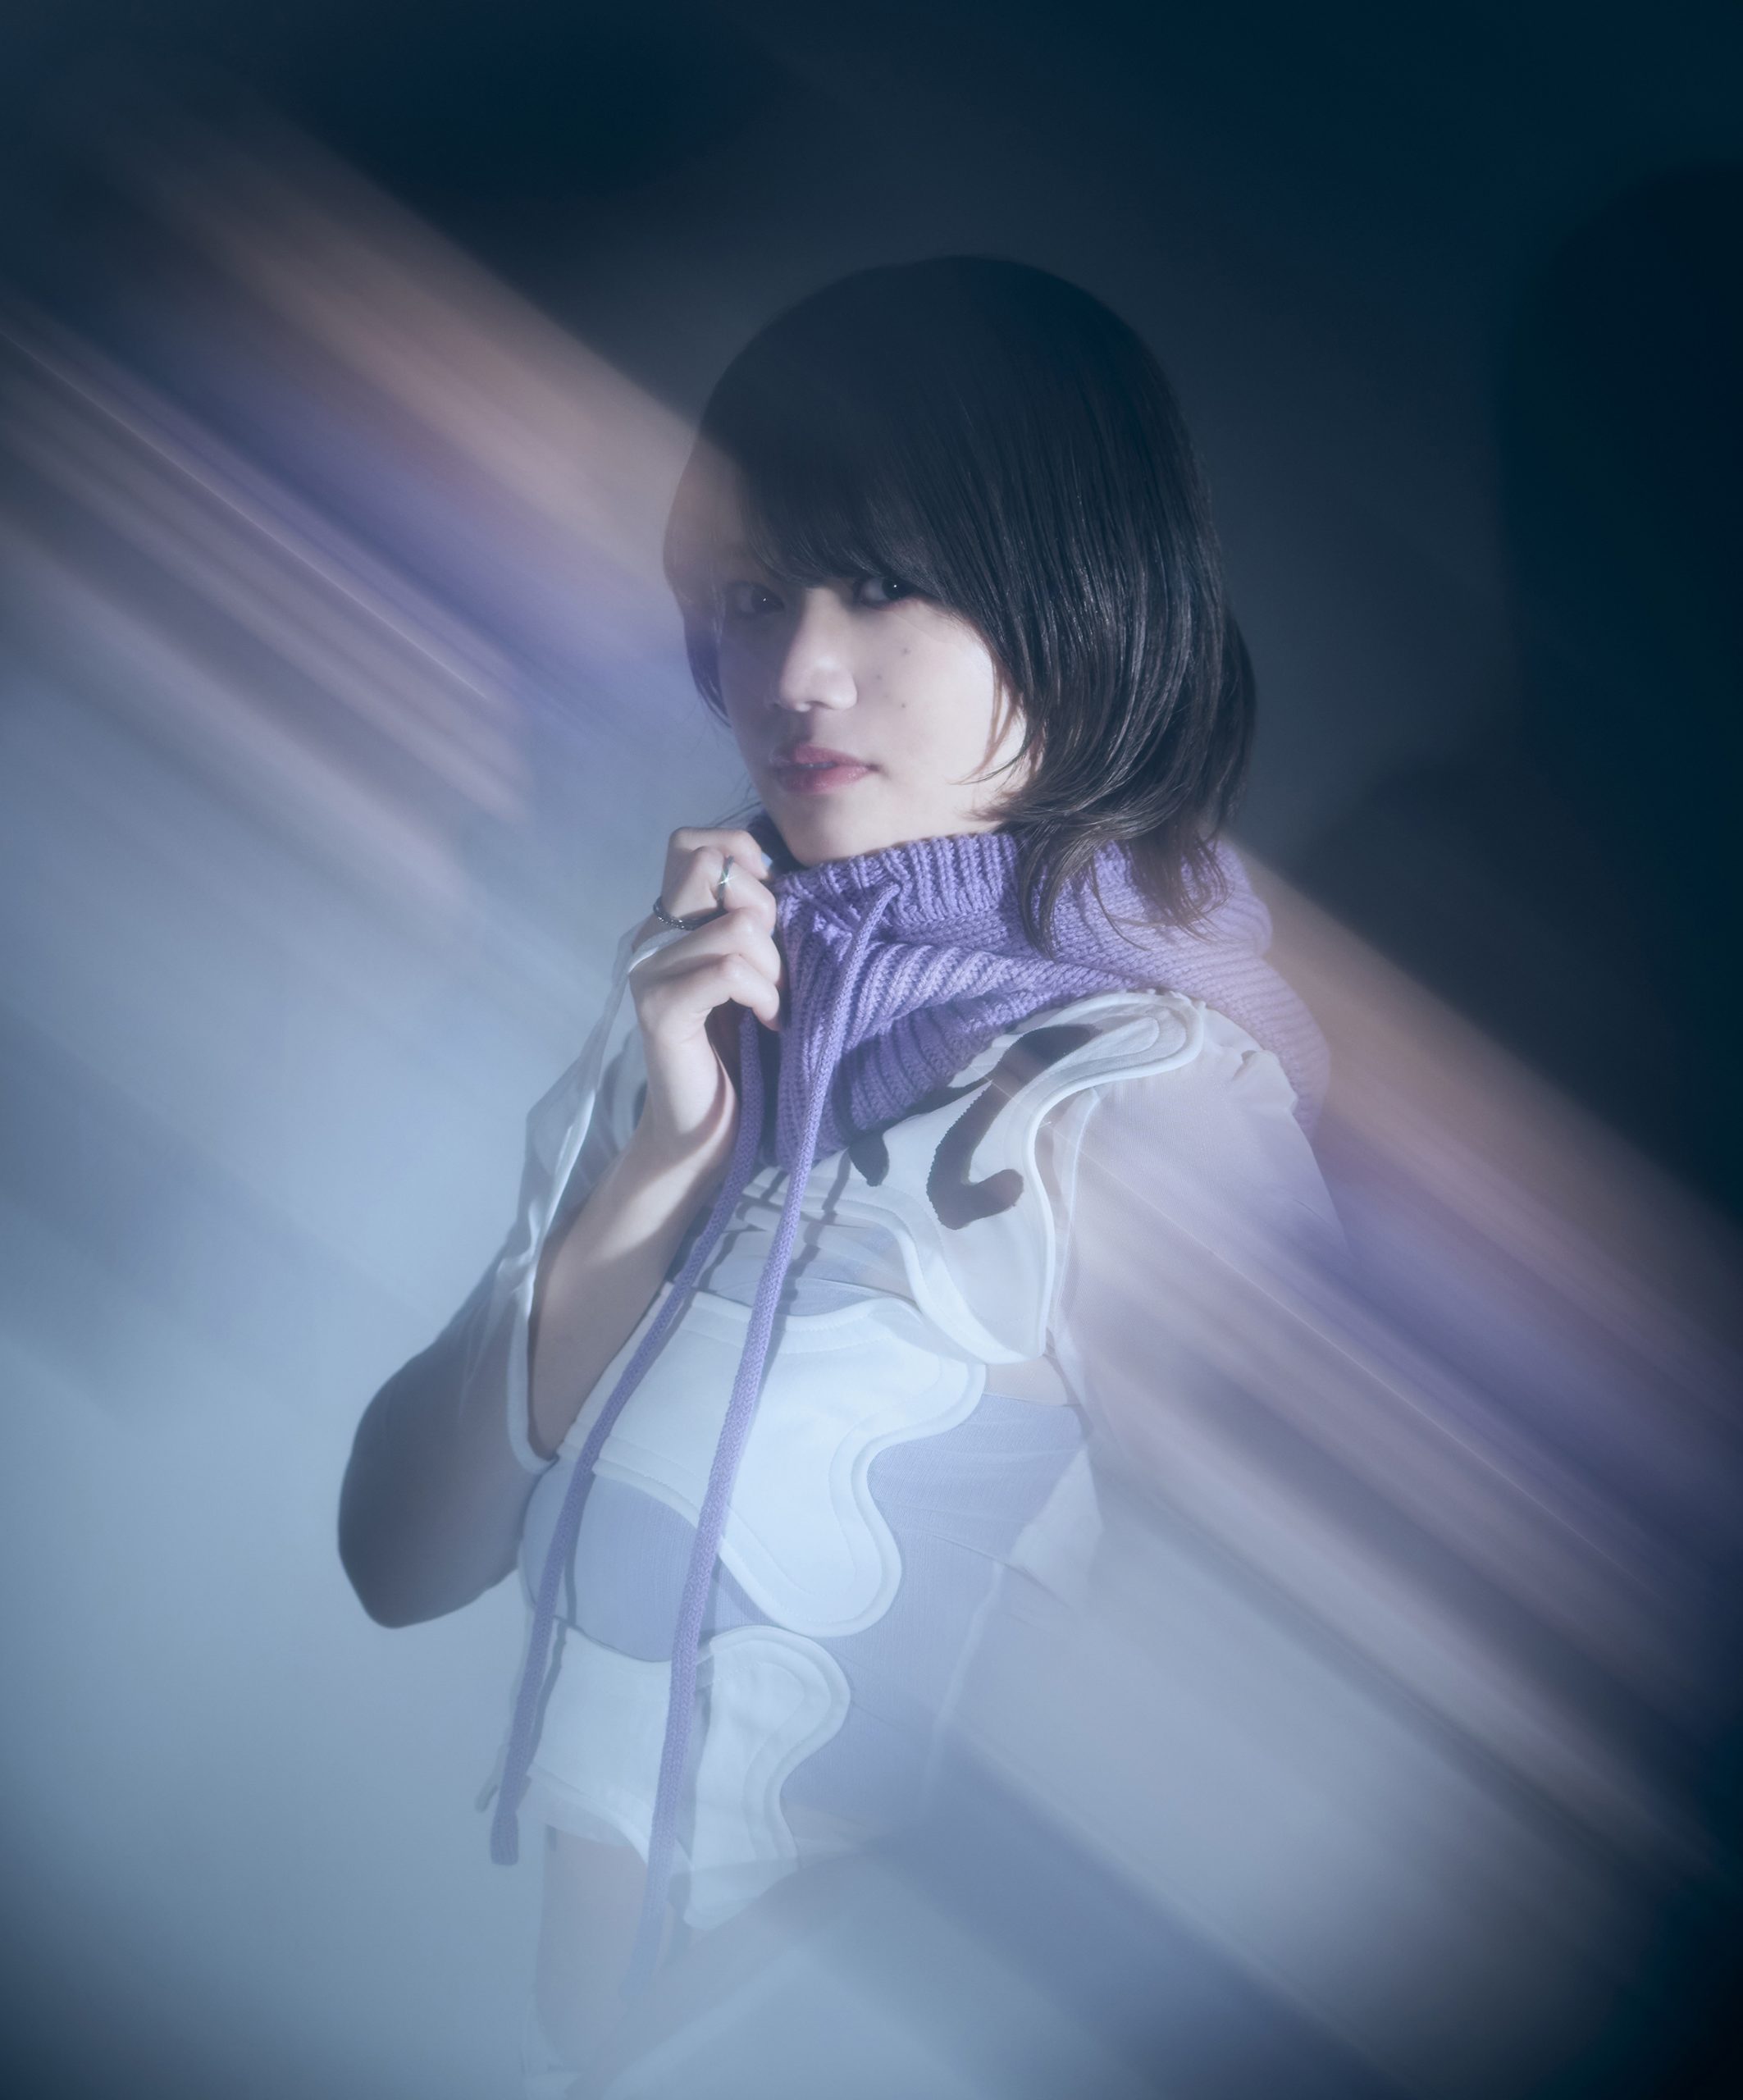 Yui-Ninomiya-Heroine-MV-thumbnail-scaled Yui Ninomiya Releases Music Video for Lead Song of Upcoming Mini Concept Album “Honkai” and  Opens YouTube Channel